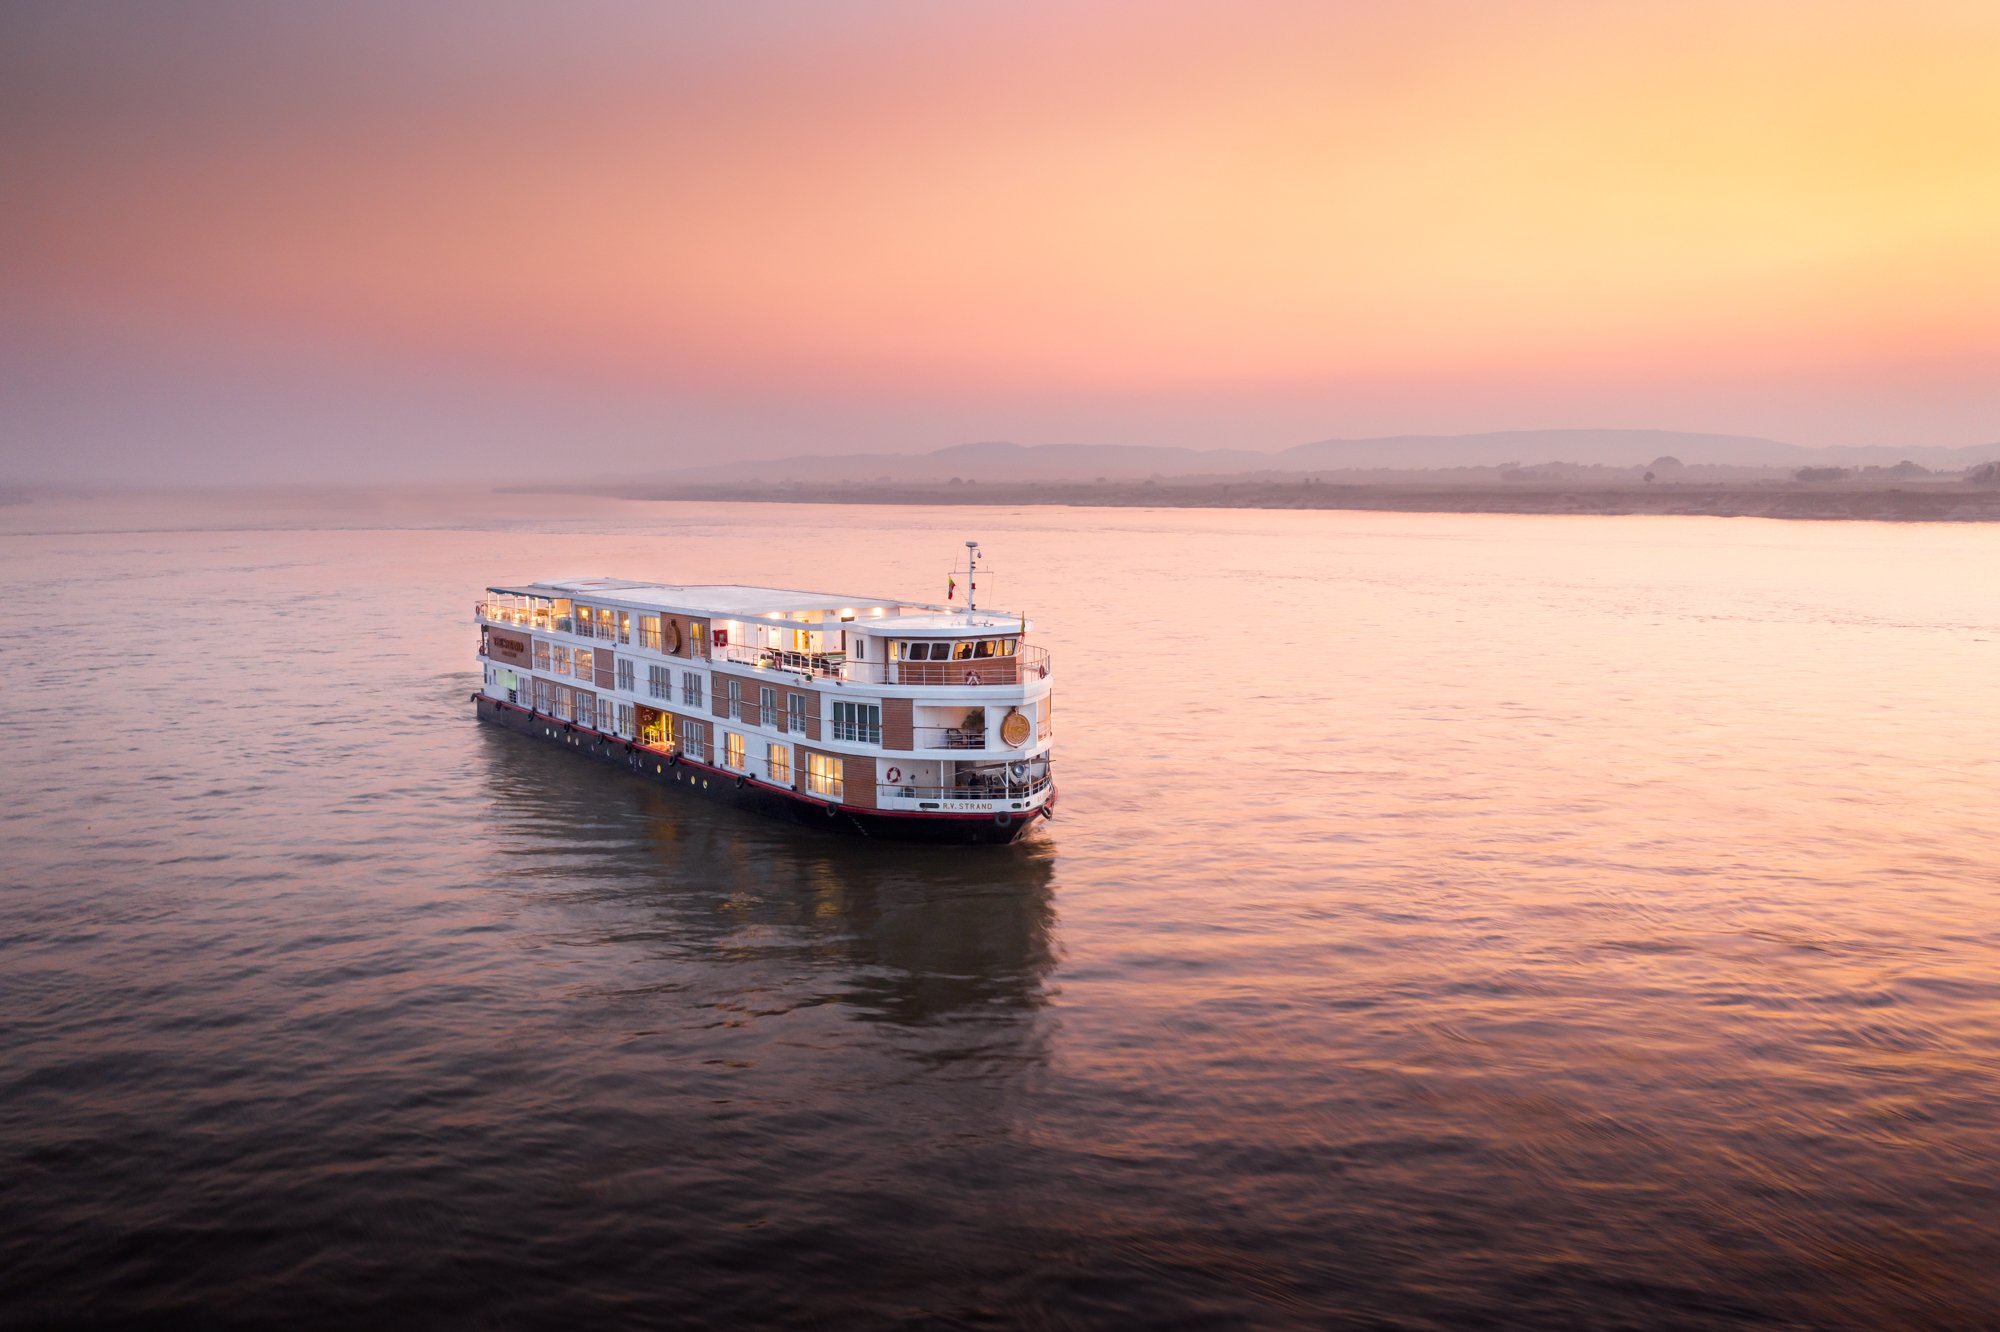 Tim Gerard Barker Creates Improved Marketing Materials for The Strand Cruise in Myanmar